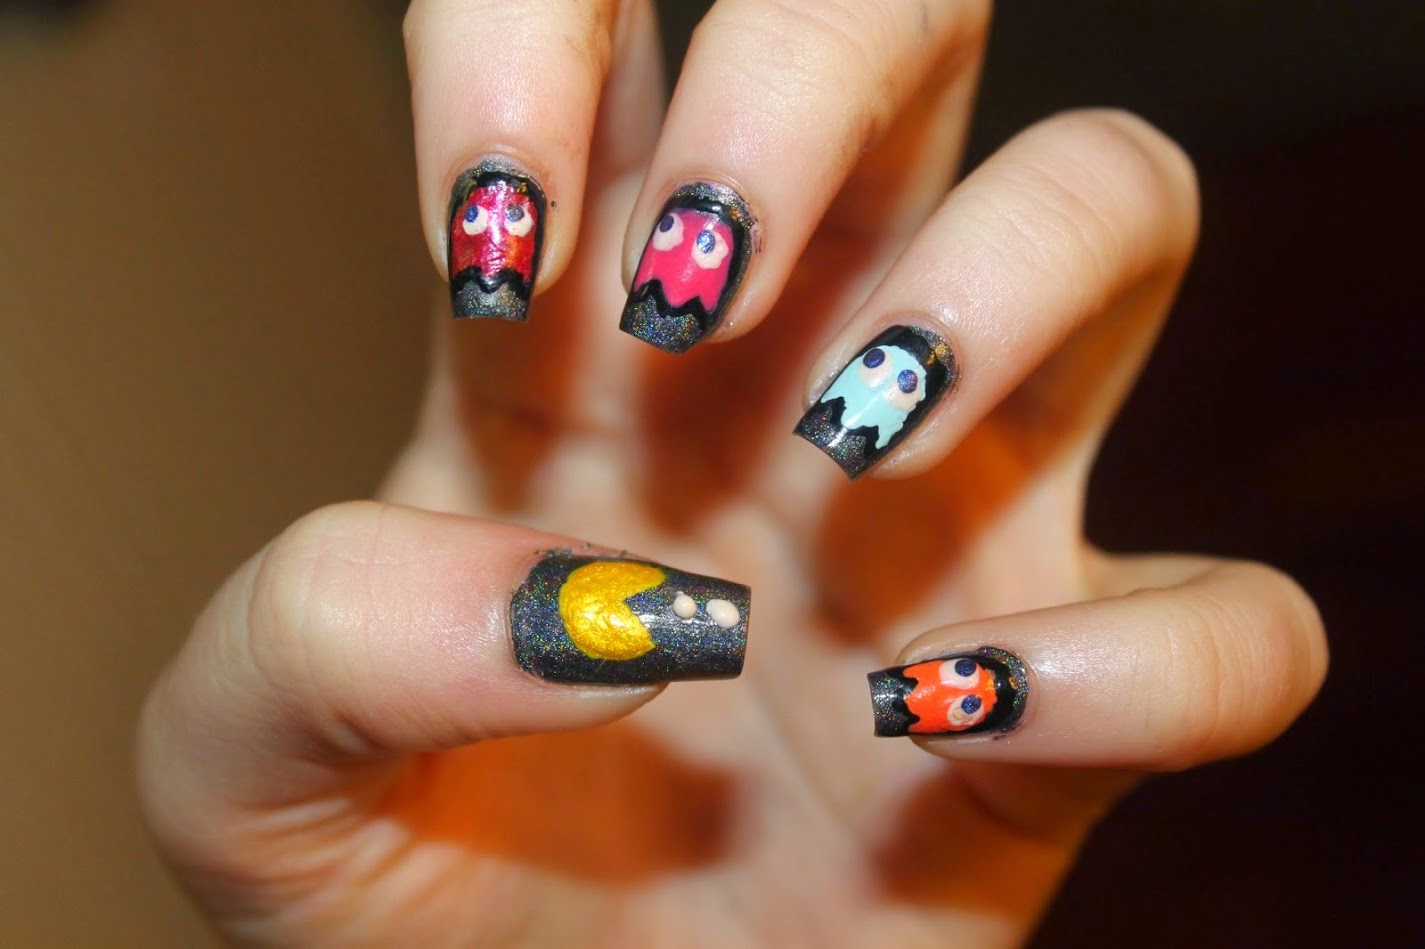 2. Pacman Themed Nail Art - wide 6